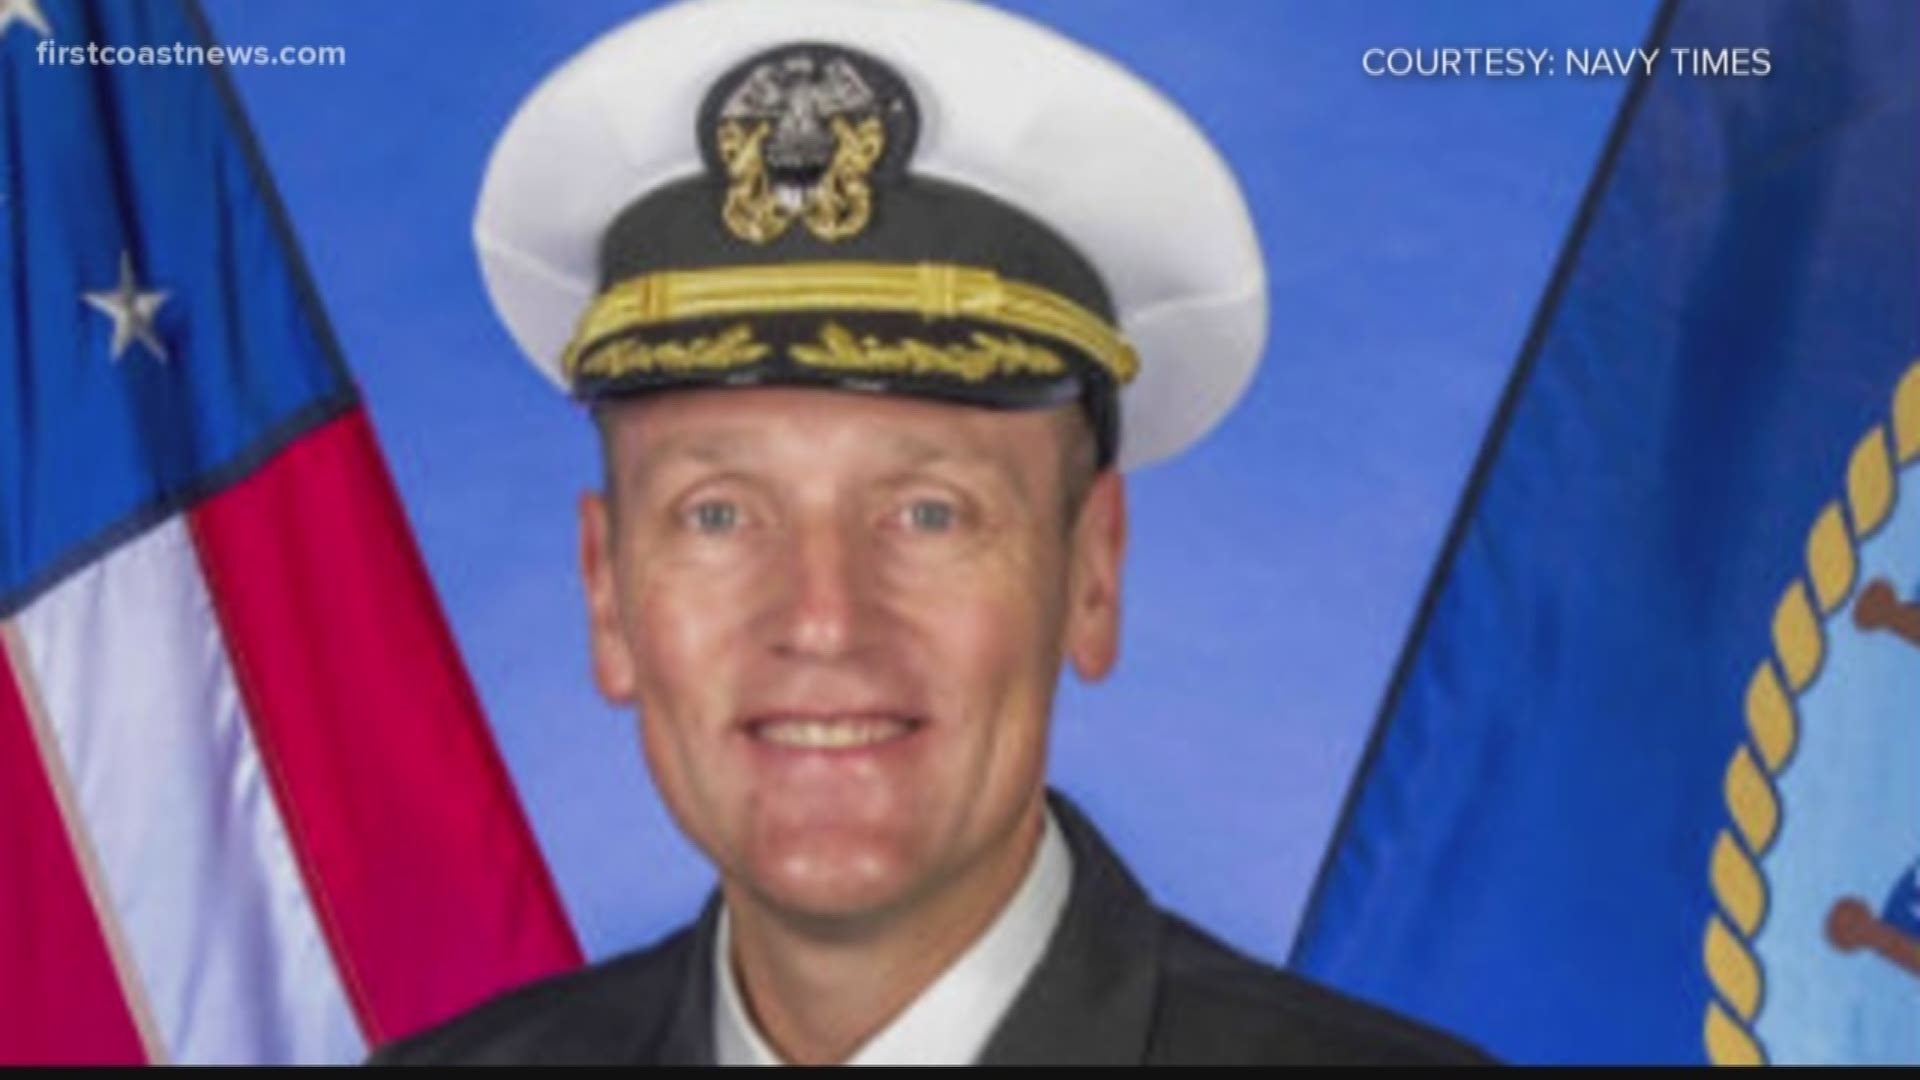 A commanding officer of the Jacksonville helicopter squadron has been fired.